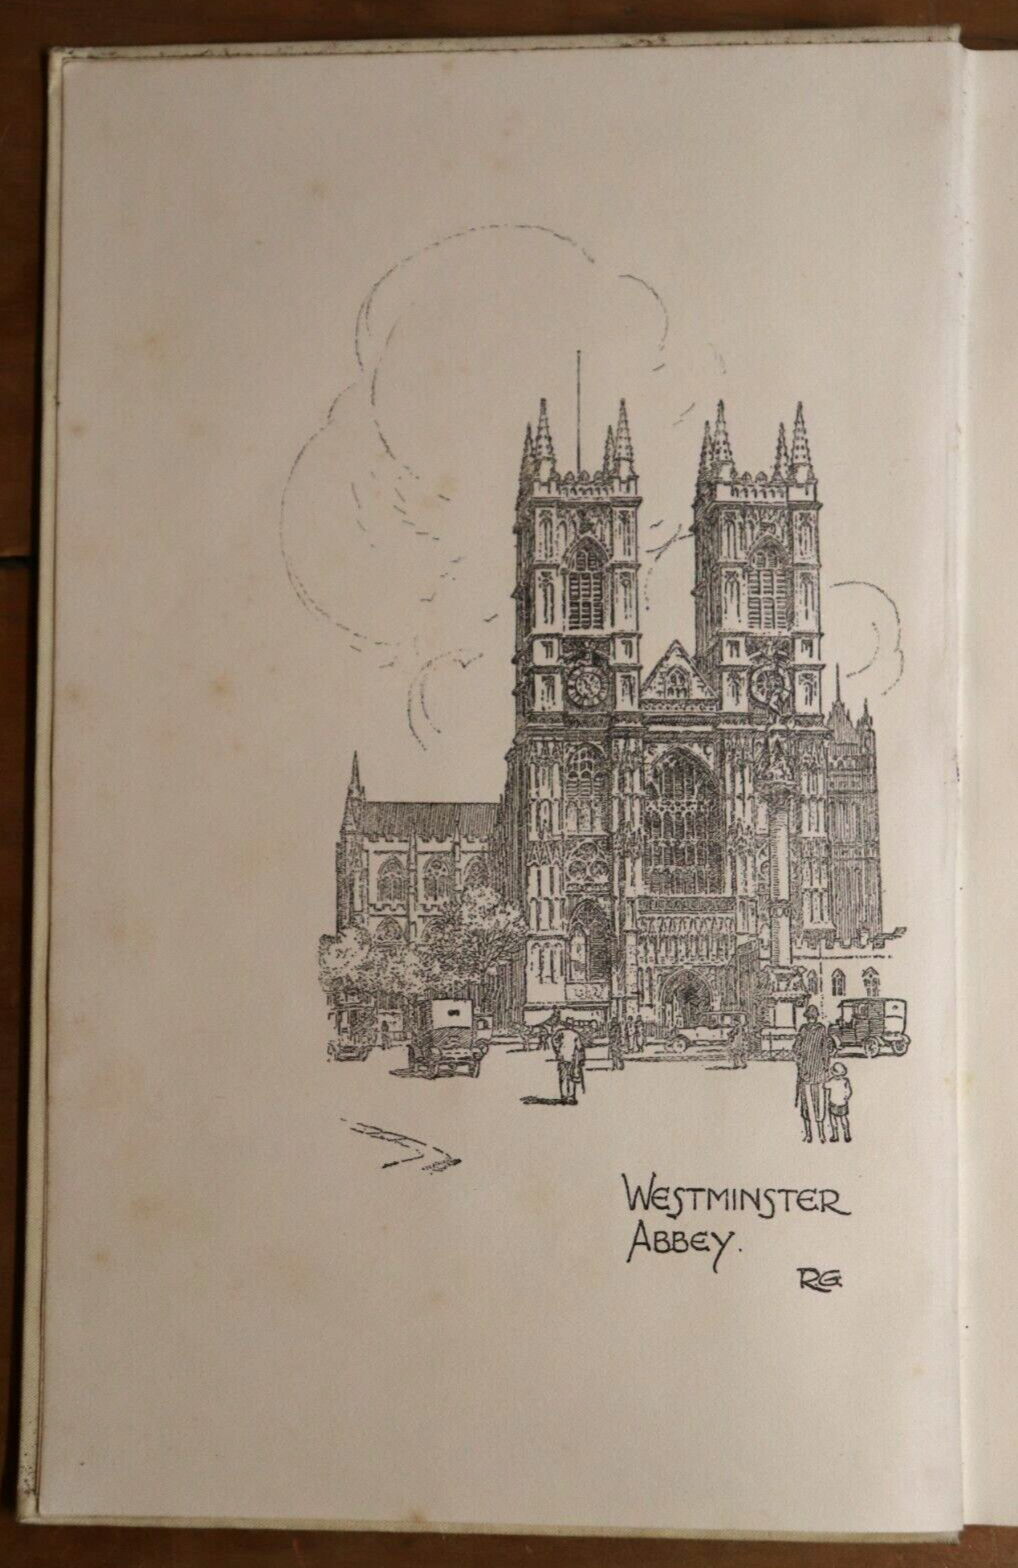 Cathedrals Abbeys & Shrines Of The British Isles - c1928 - Antique History Book